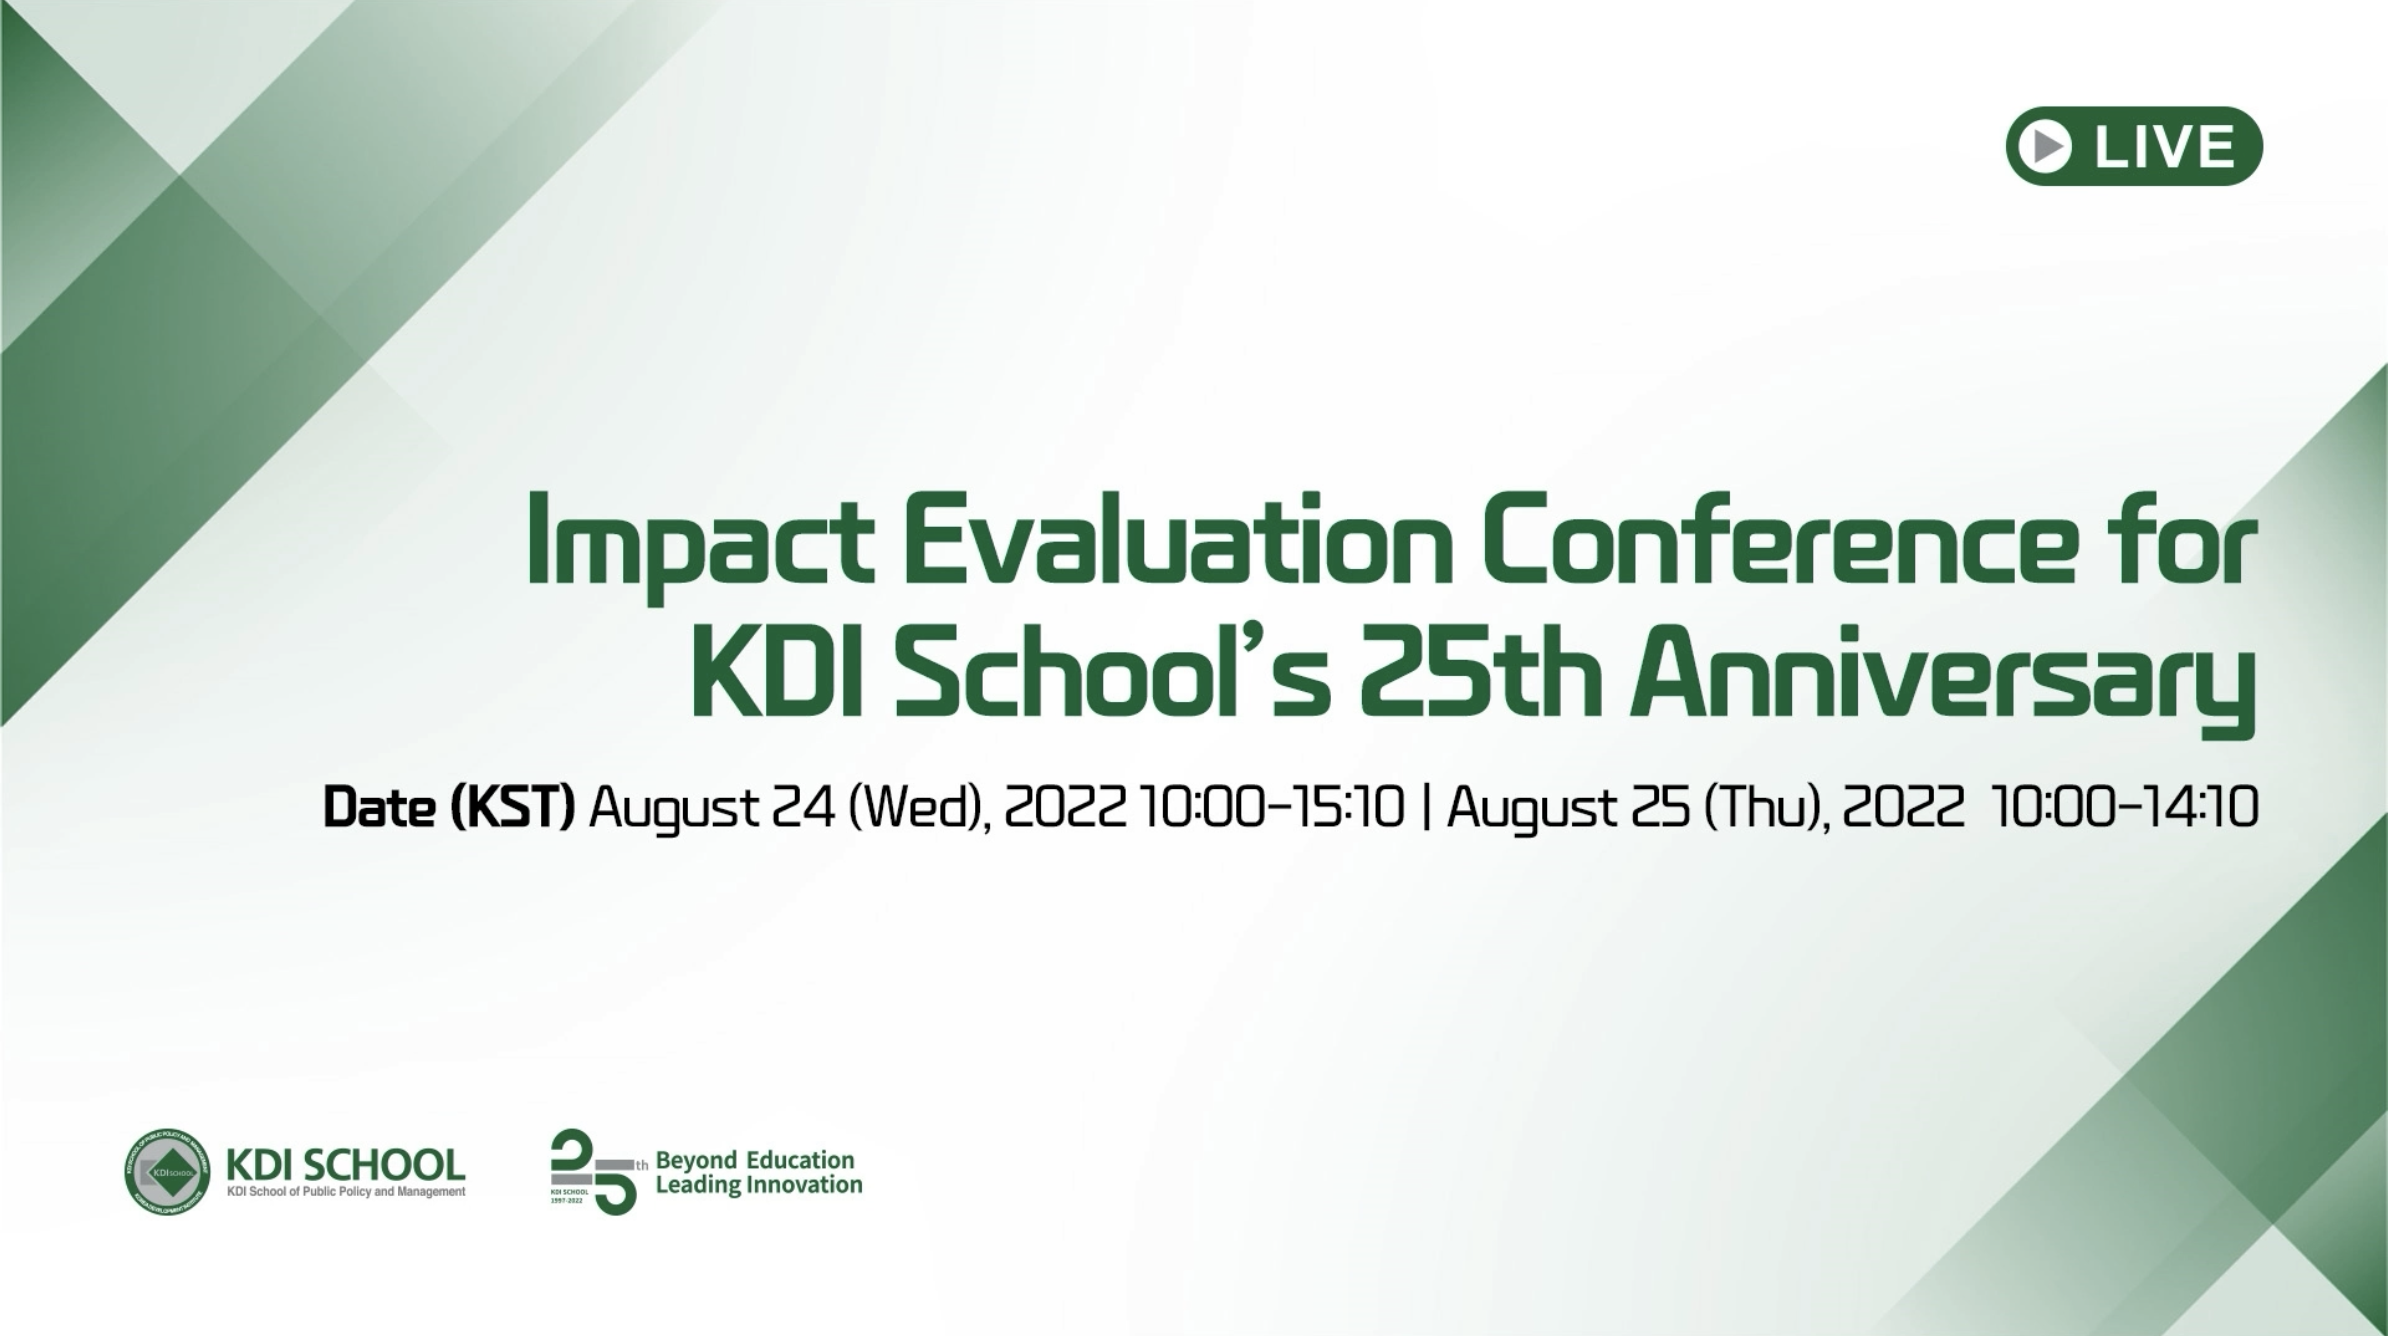 Impact Evaluation Conference for KDIS’s 25th Anniversary